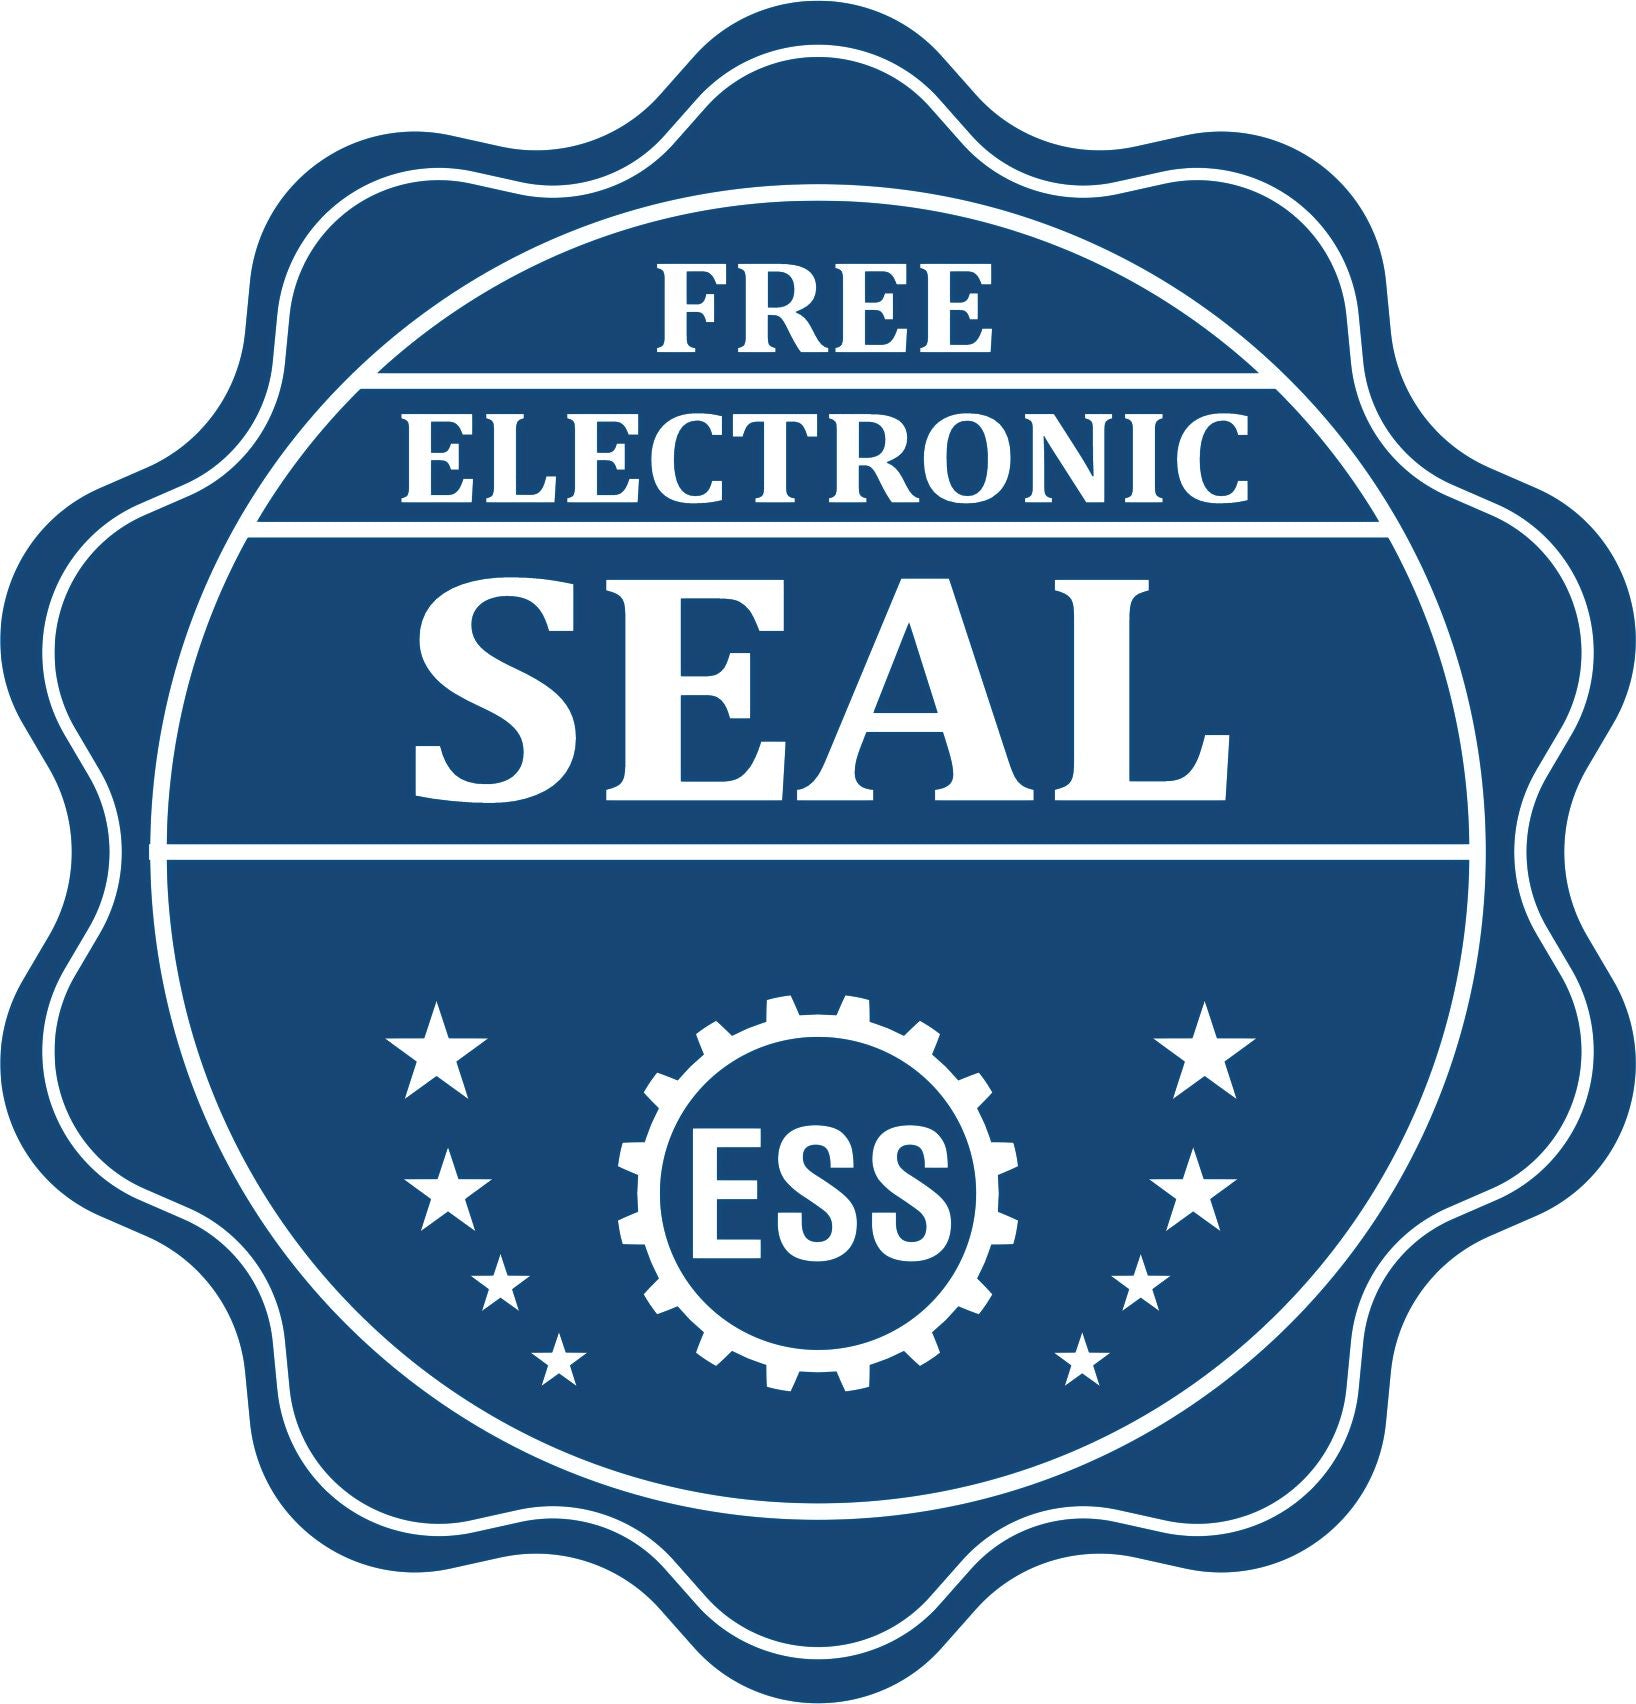 A badge showing a free electronic seal for the Connecticut Engineer Desk Seal with stars and the ESS gear on the emblem.